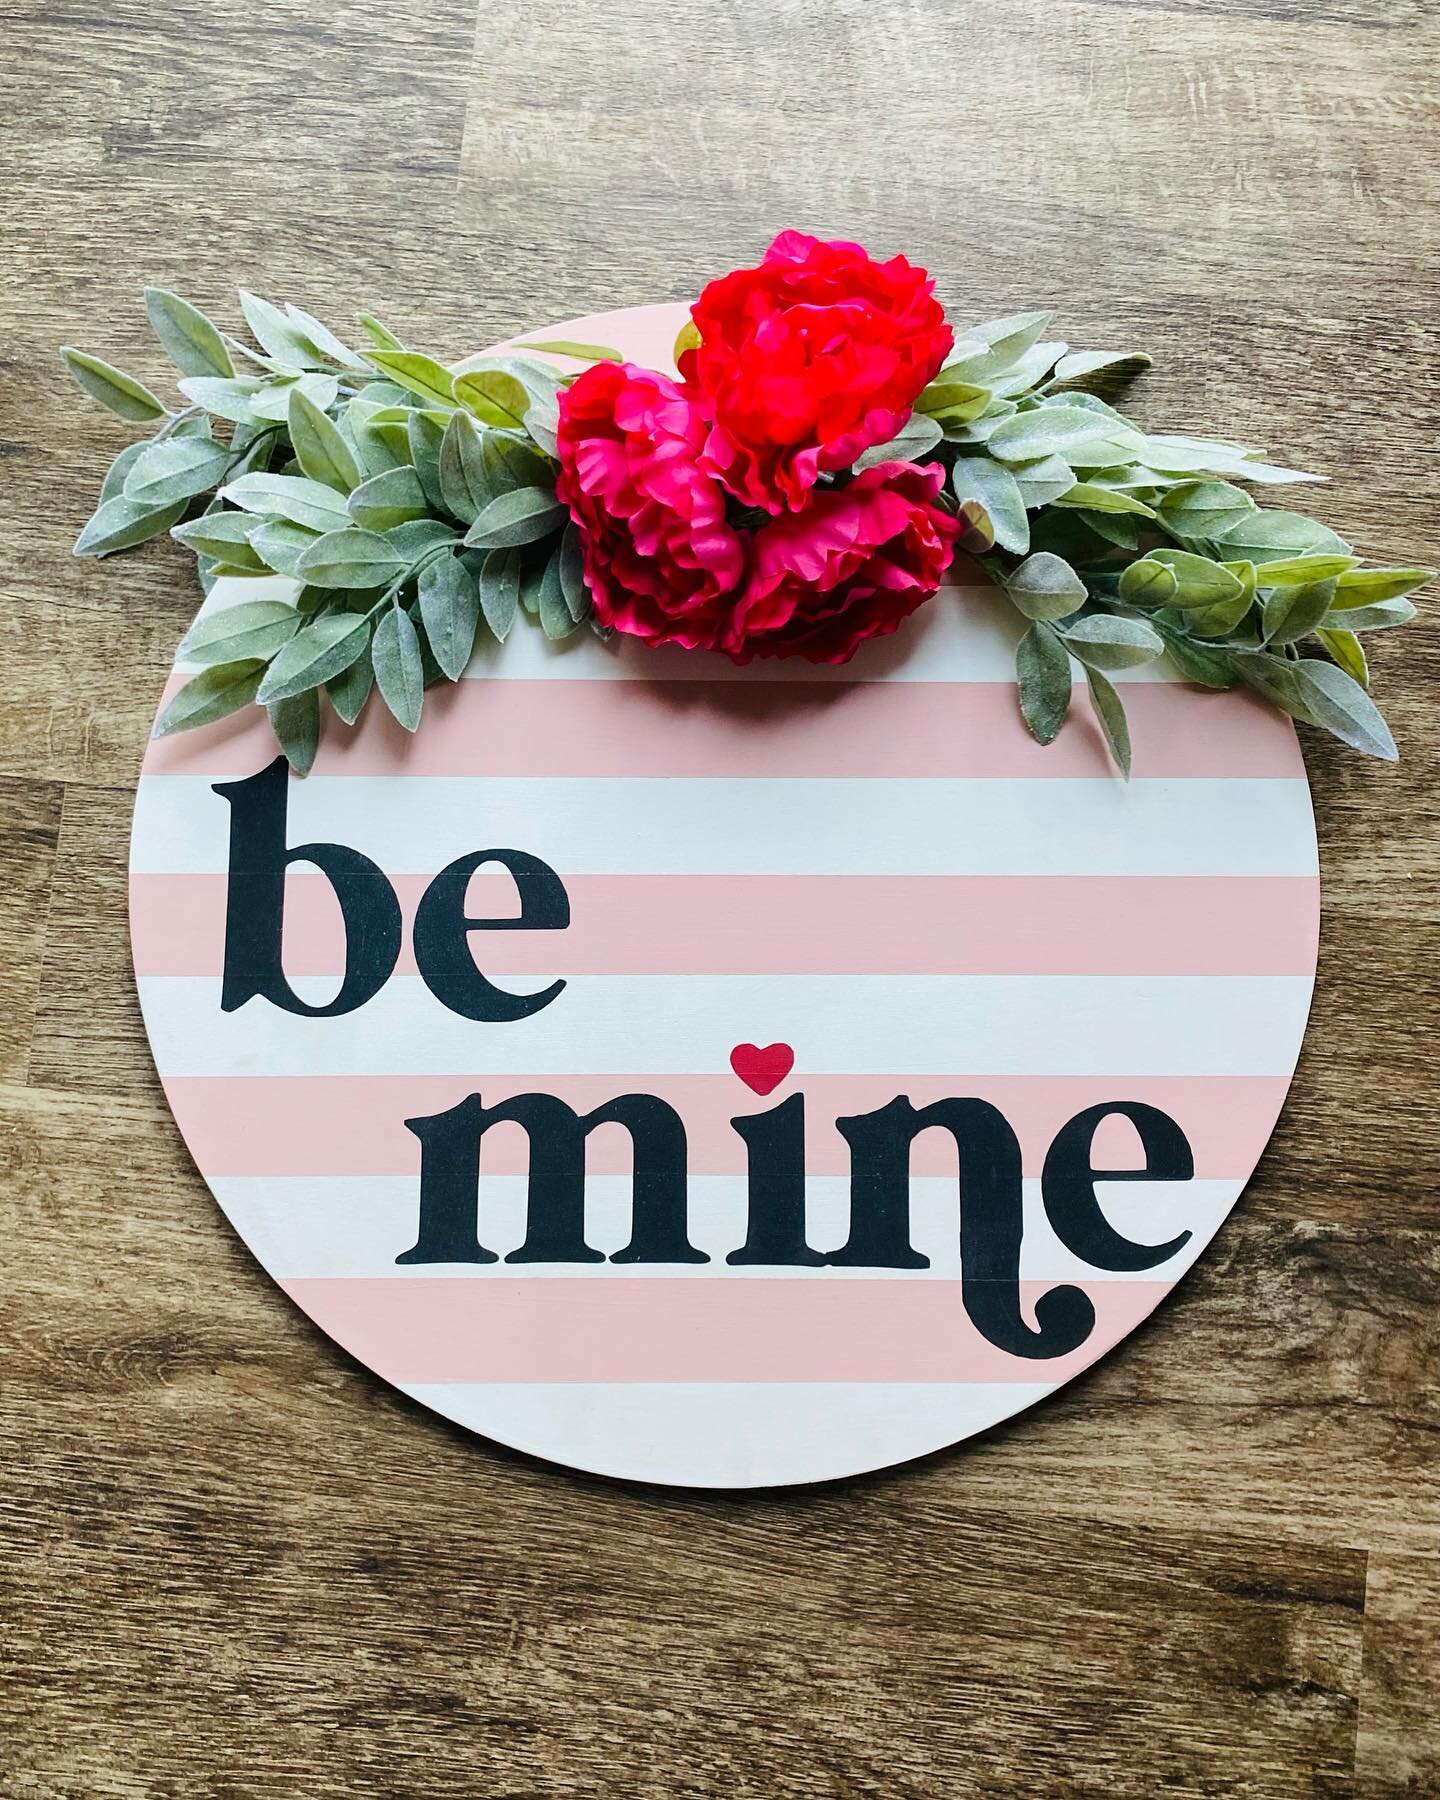 Love is in the air and I&rsquo;m in love with this be mine circle sign for my front door. Order yours today and share some love all month long. Happy first day of February. #valentines #bemine #circlesign #pluffmuds #shopsmall #shoplocal #shopclt